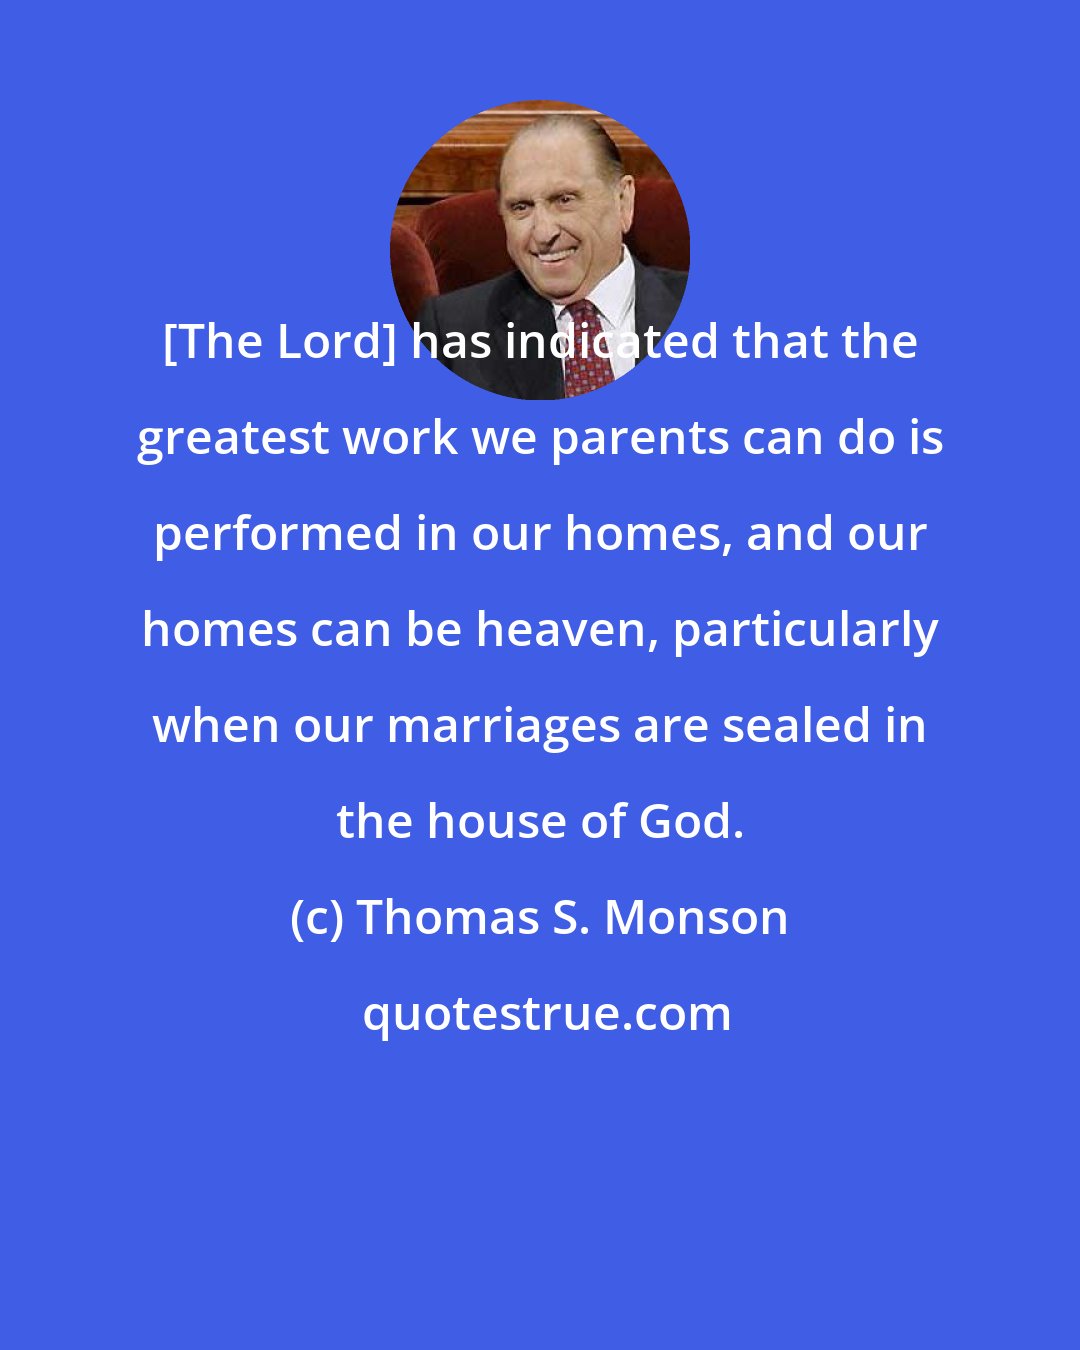 Thomas S. Monson: [The Lord] has indicated that the greatest work we parents can do is performed in our homes, and our homes can be heaven, particularly when our marriages are sealed in the house of God.